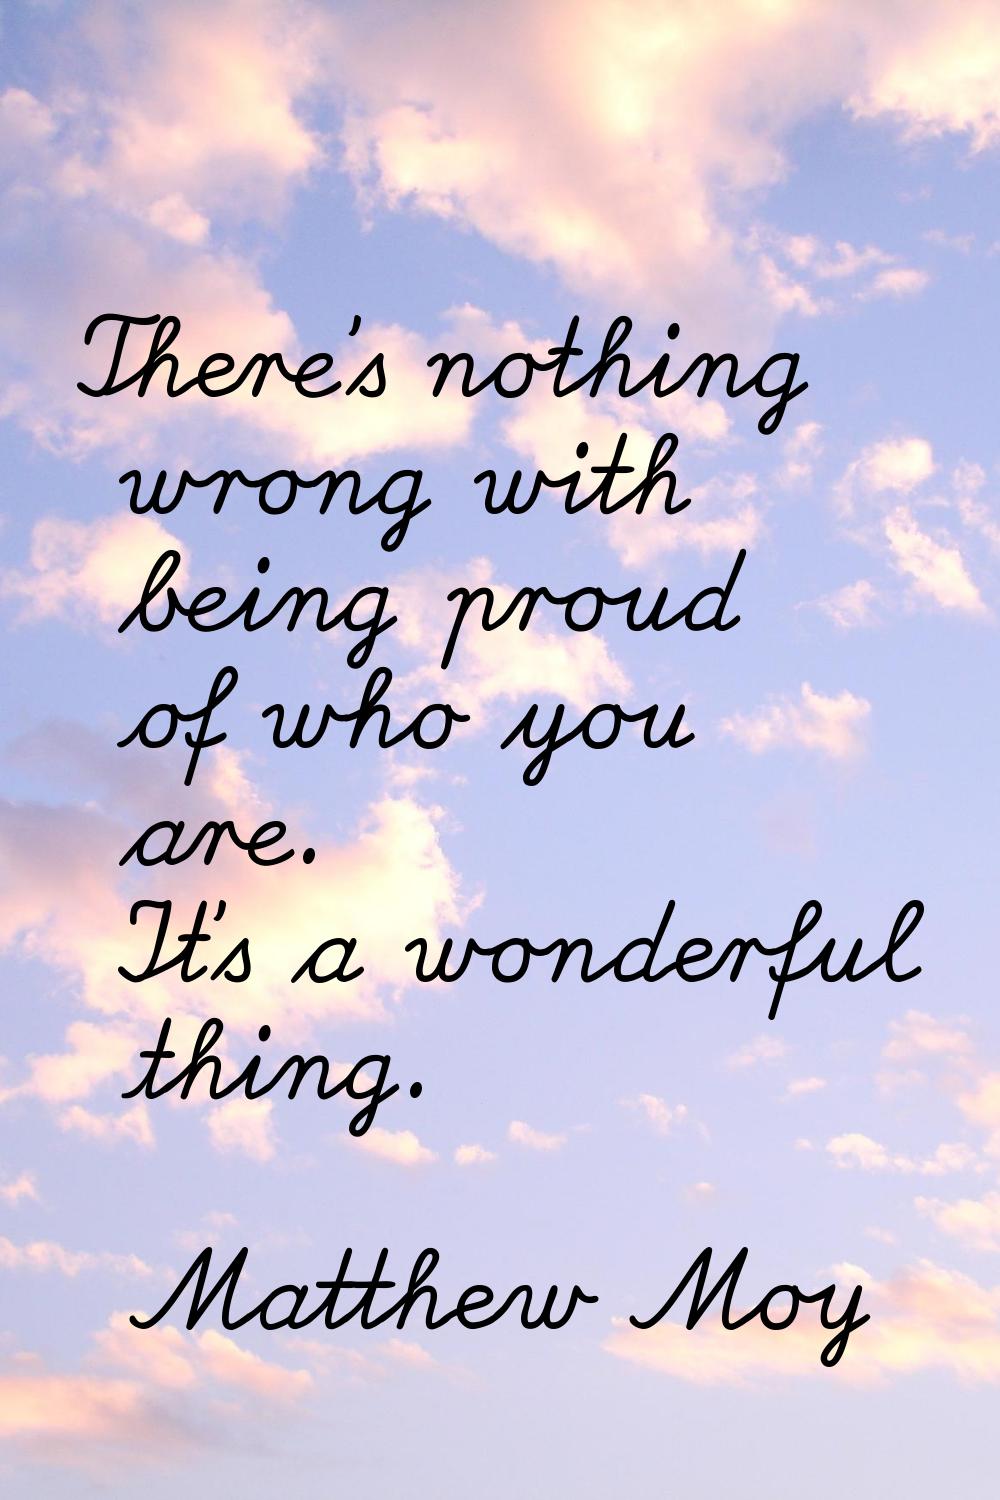 There's nothing wrong with being proud of who you are. It's a wonderful thing.